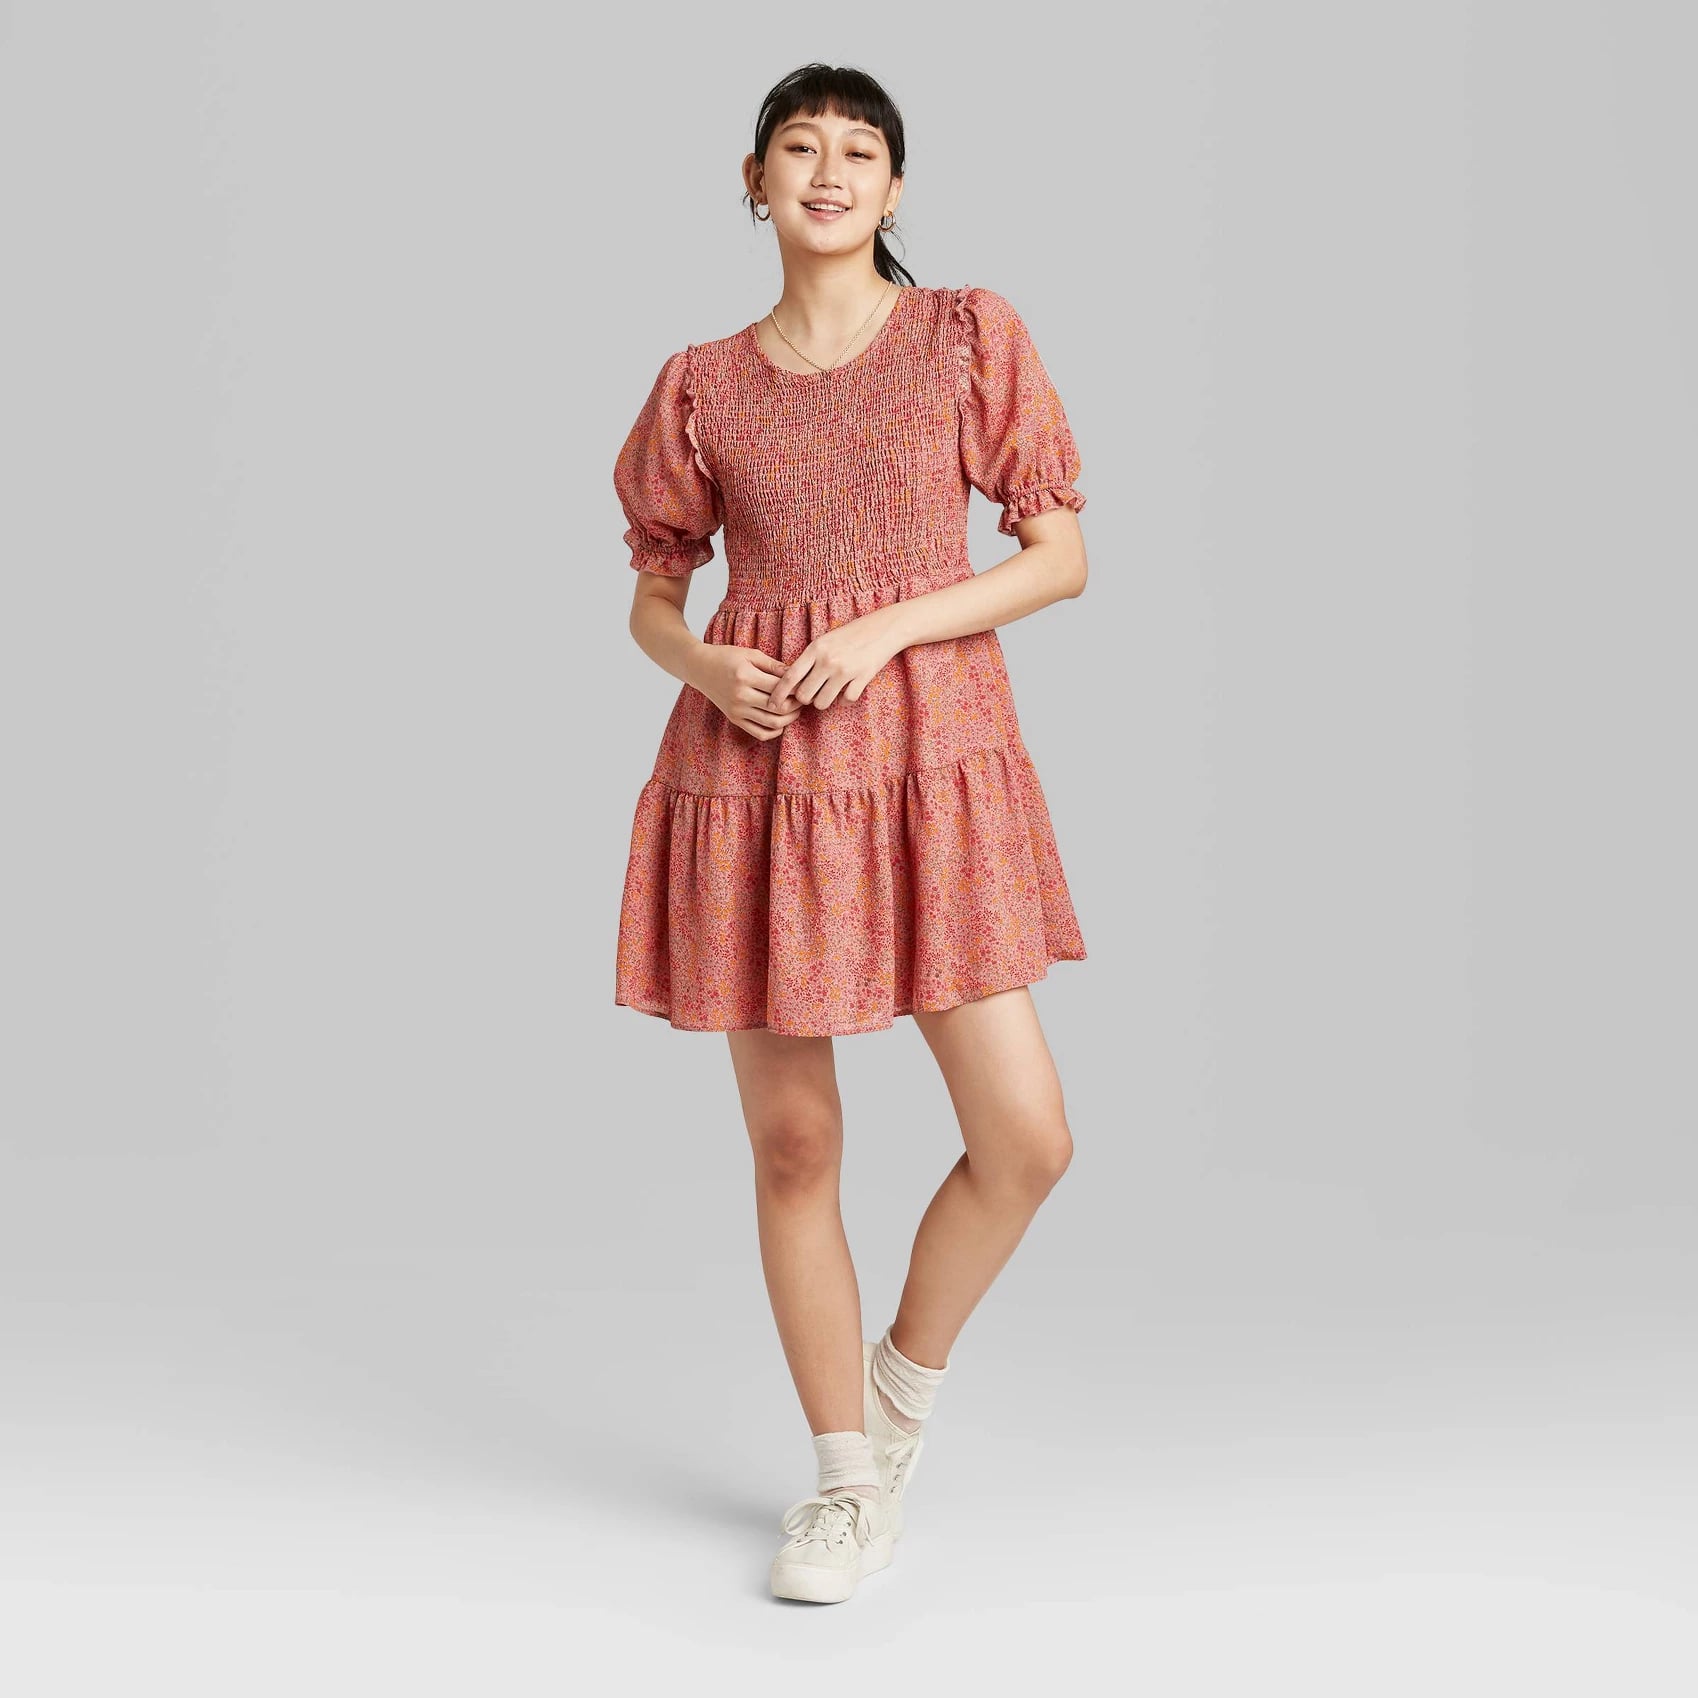 Wild Fable Short-Sleeve Smocked Top Tiered Dress, The 16 Most Popular  Target Pieces in August, and How Women Are Wearing Them